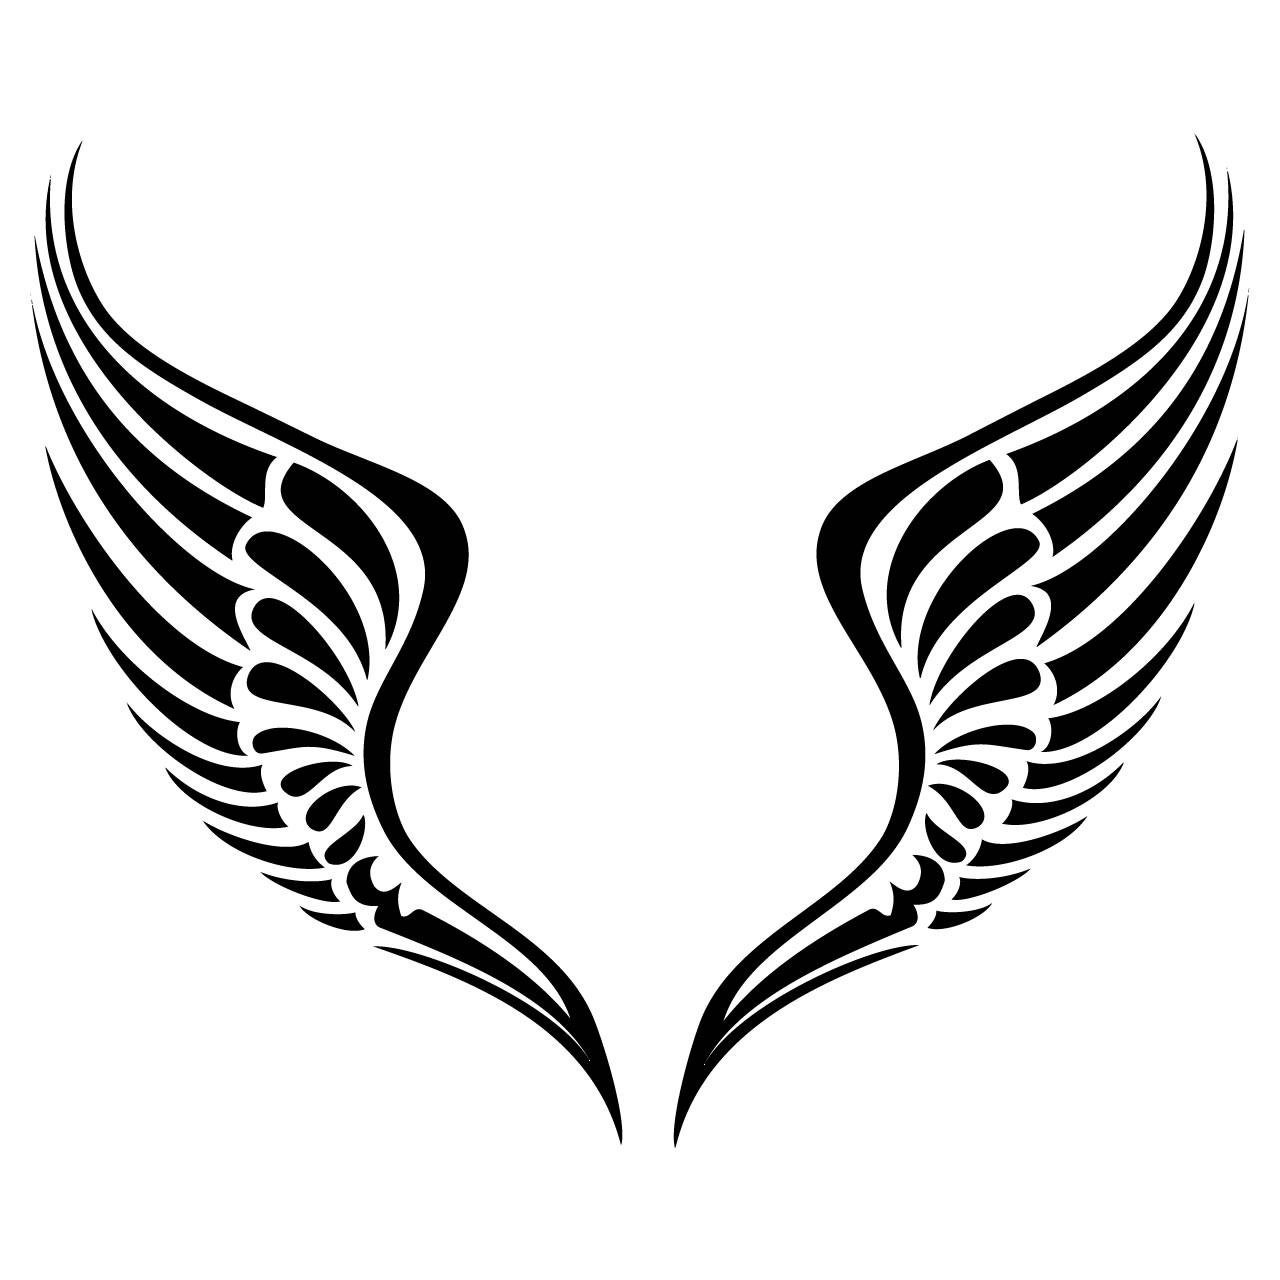 Angel wing clipart